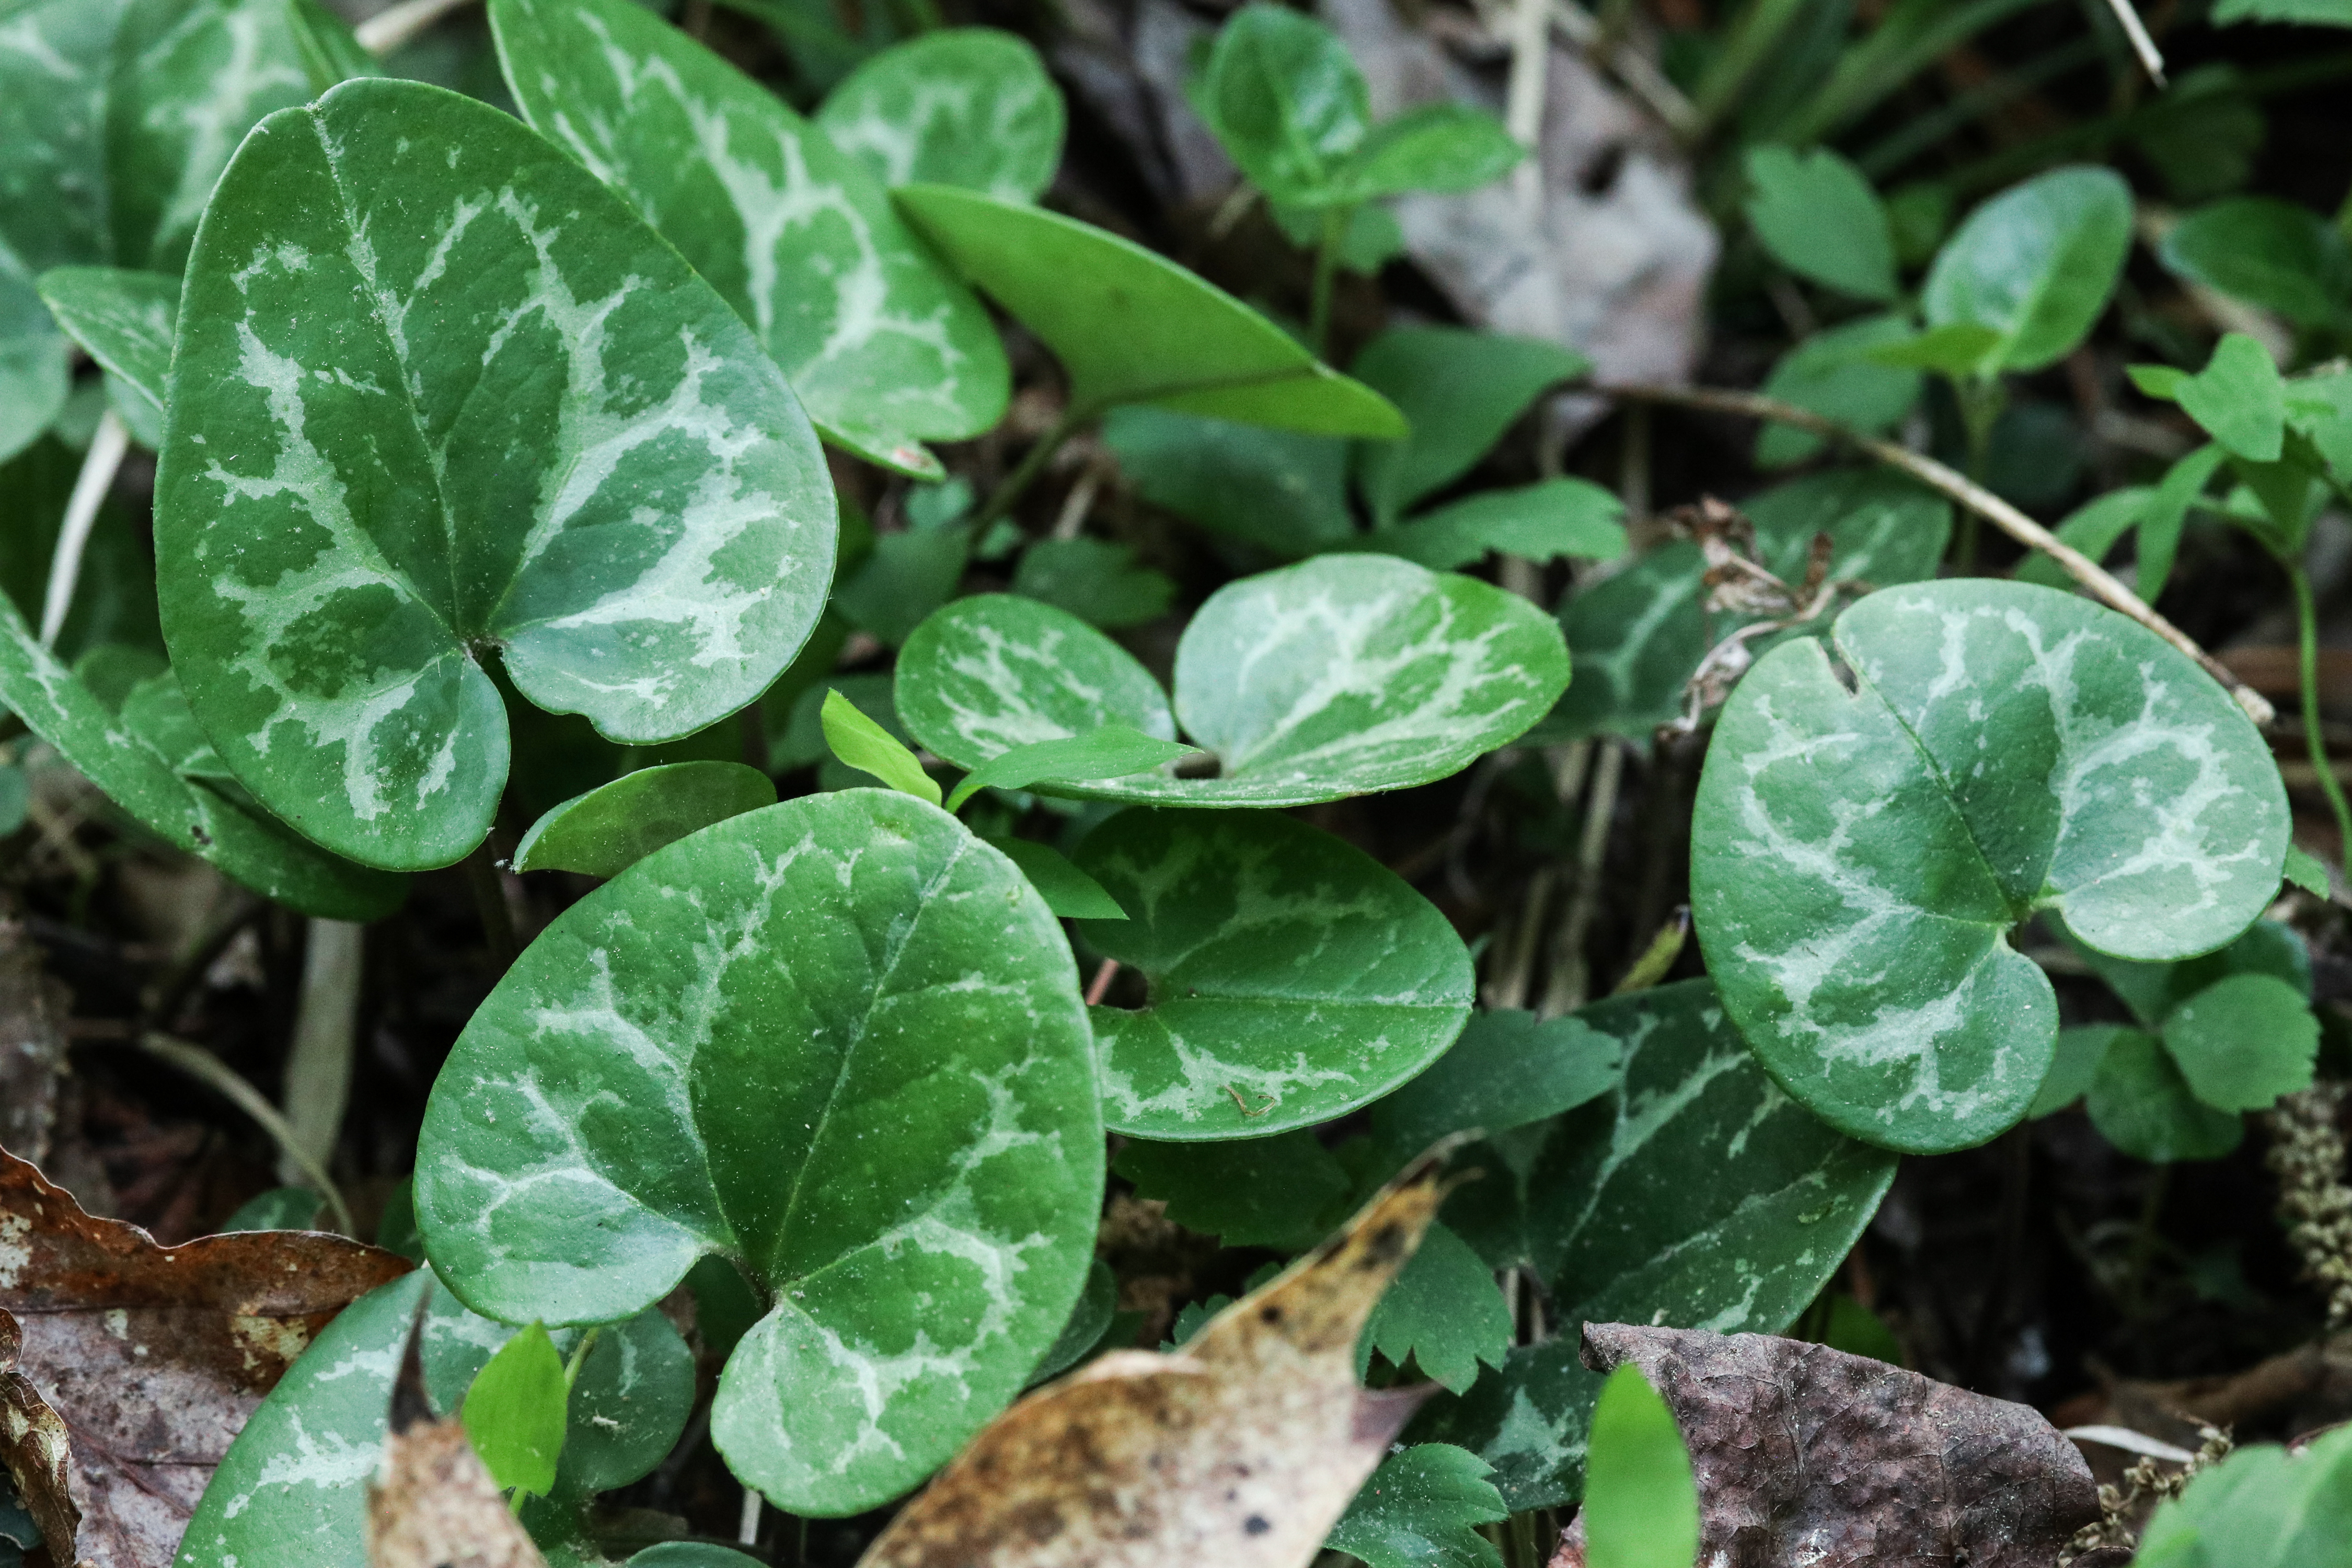 A green plant with leaves in the shape of an upside-down heart with white splotches